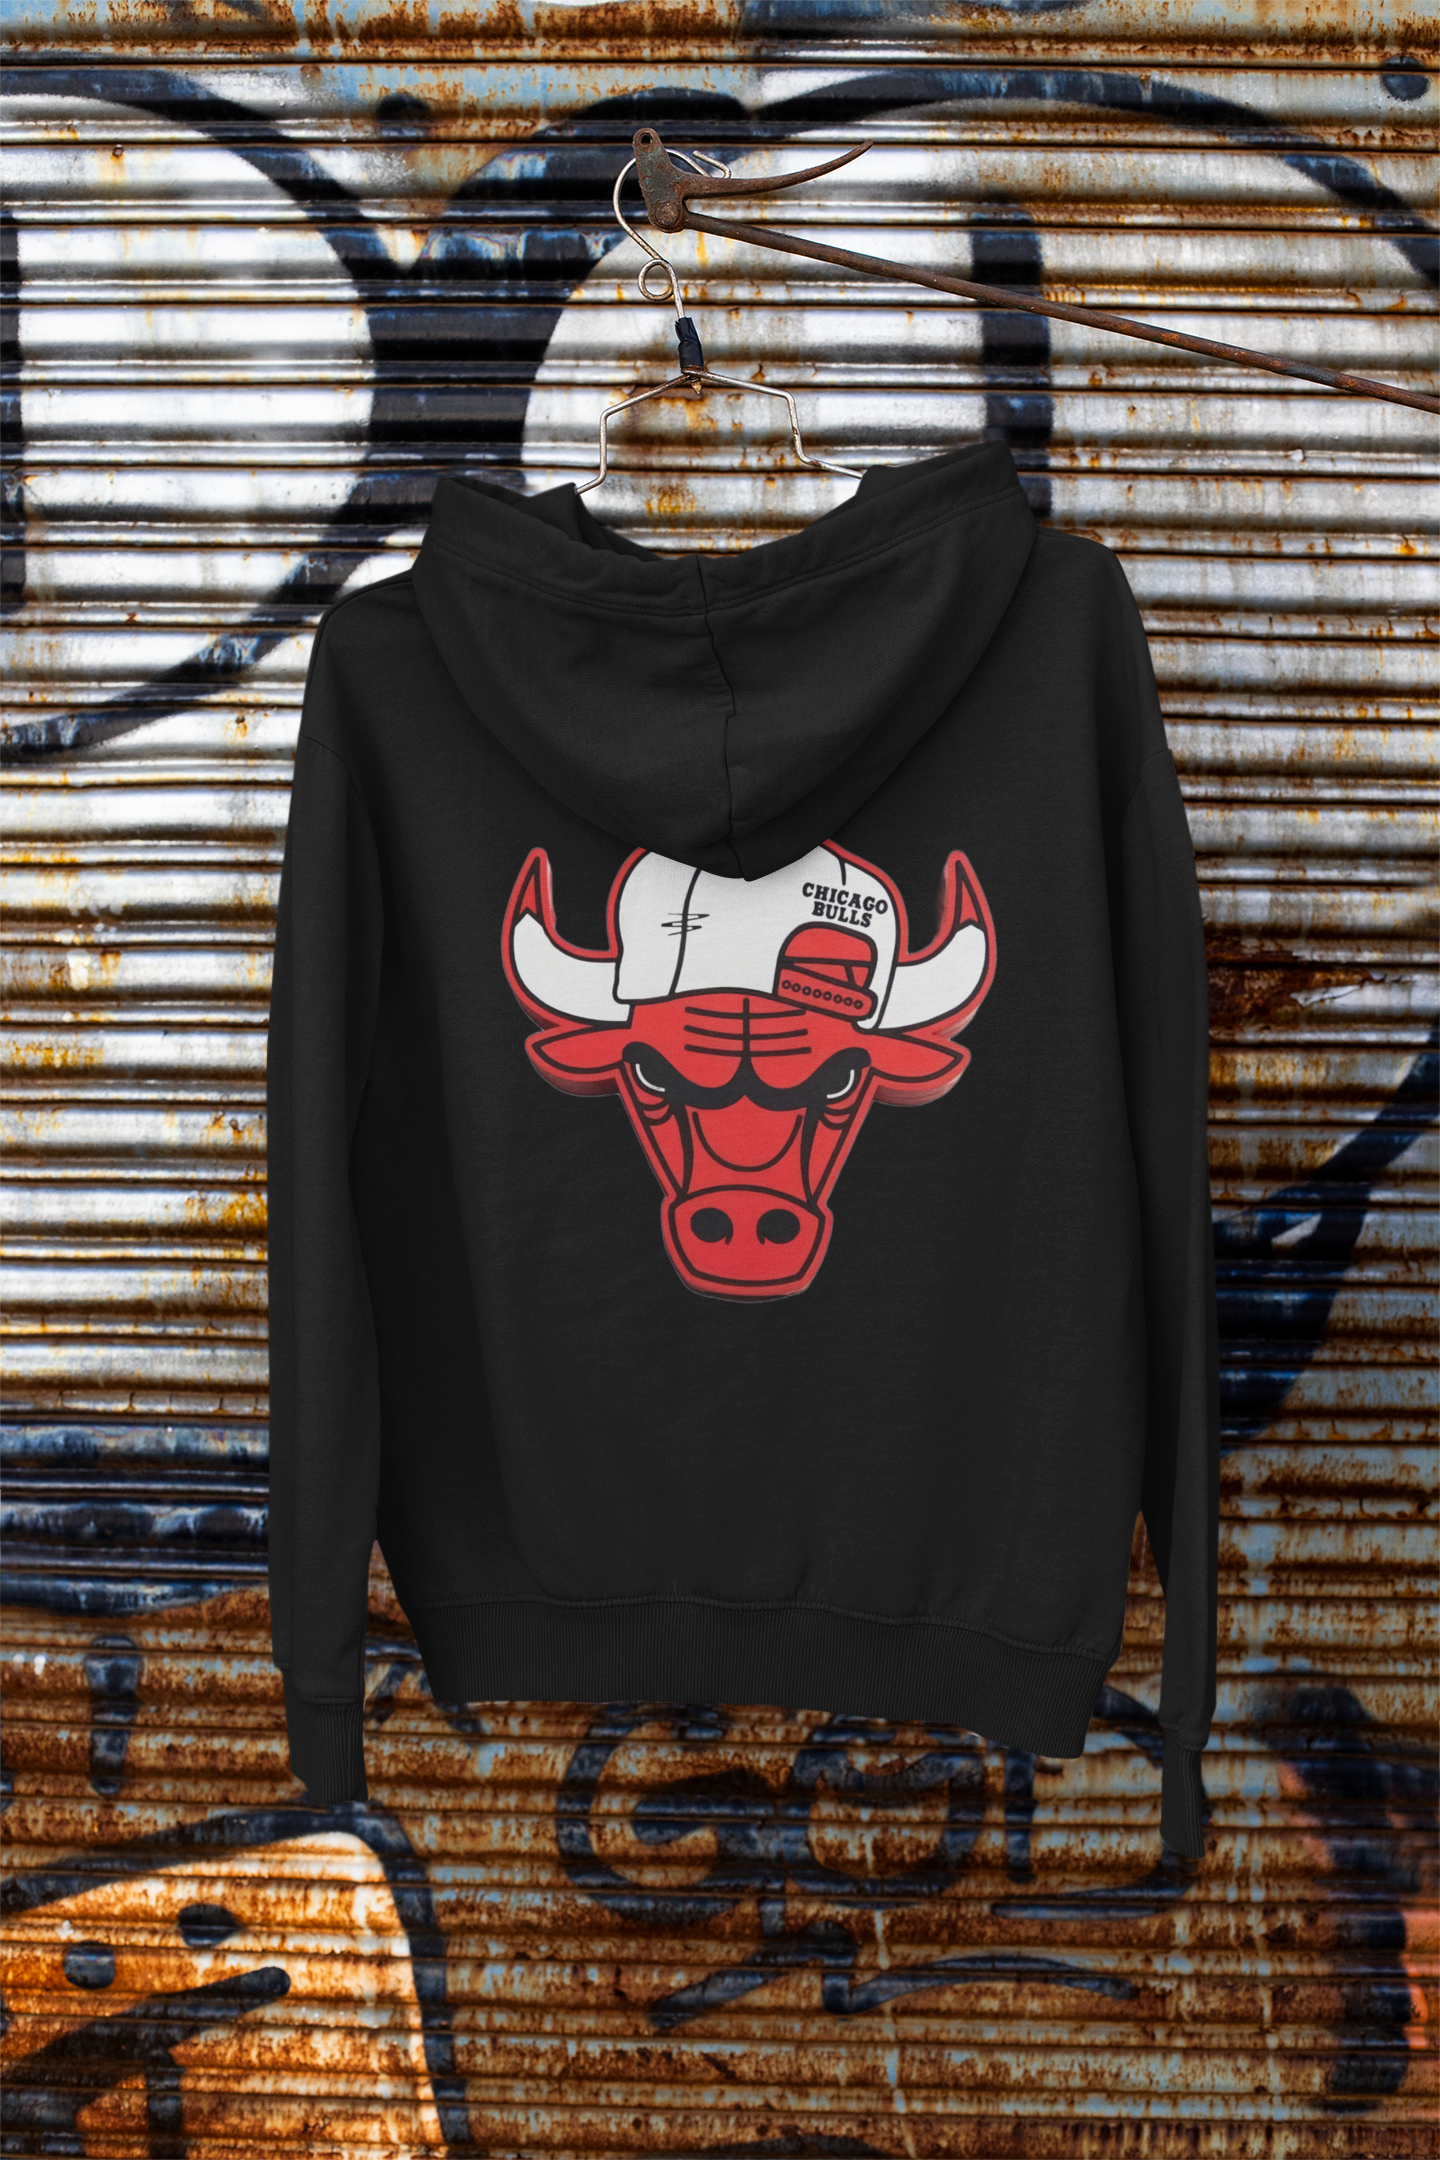 Chicago Bulls Oversized Fit Hoodie